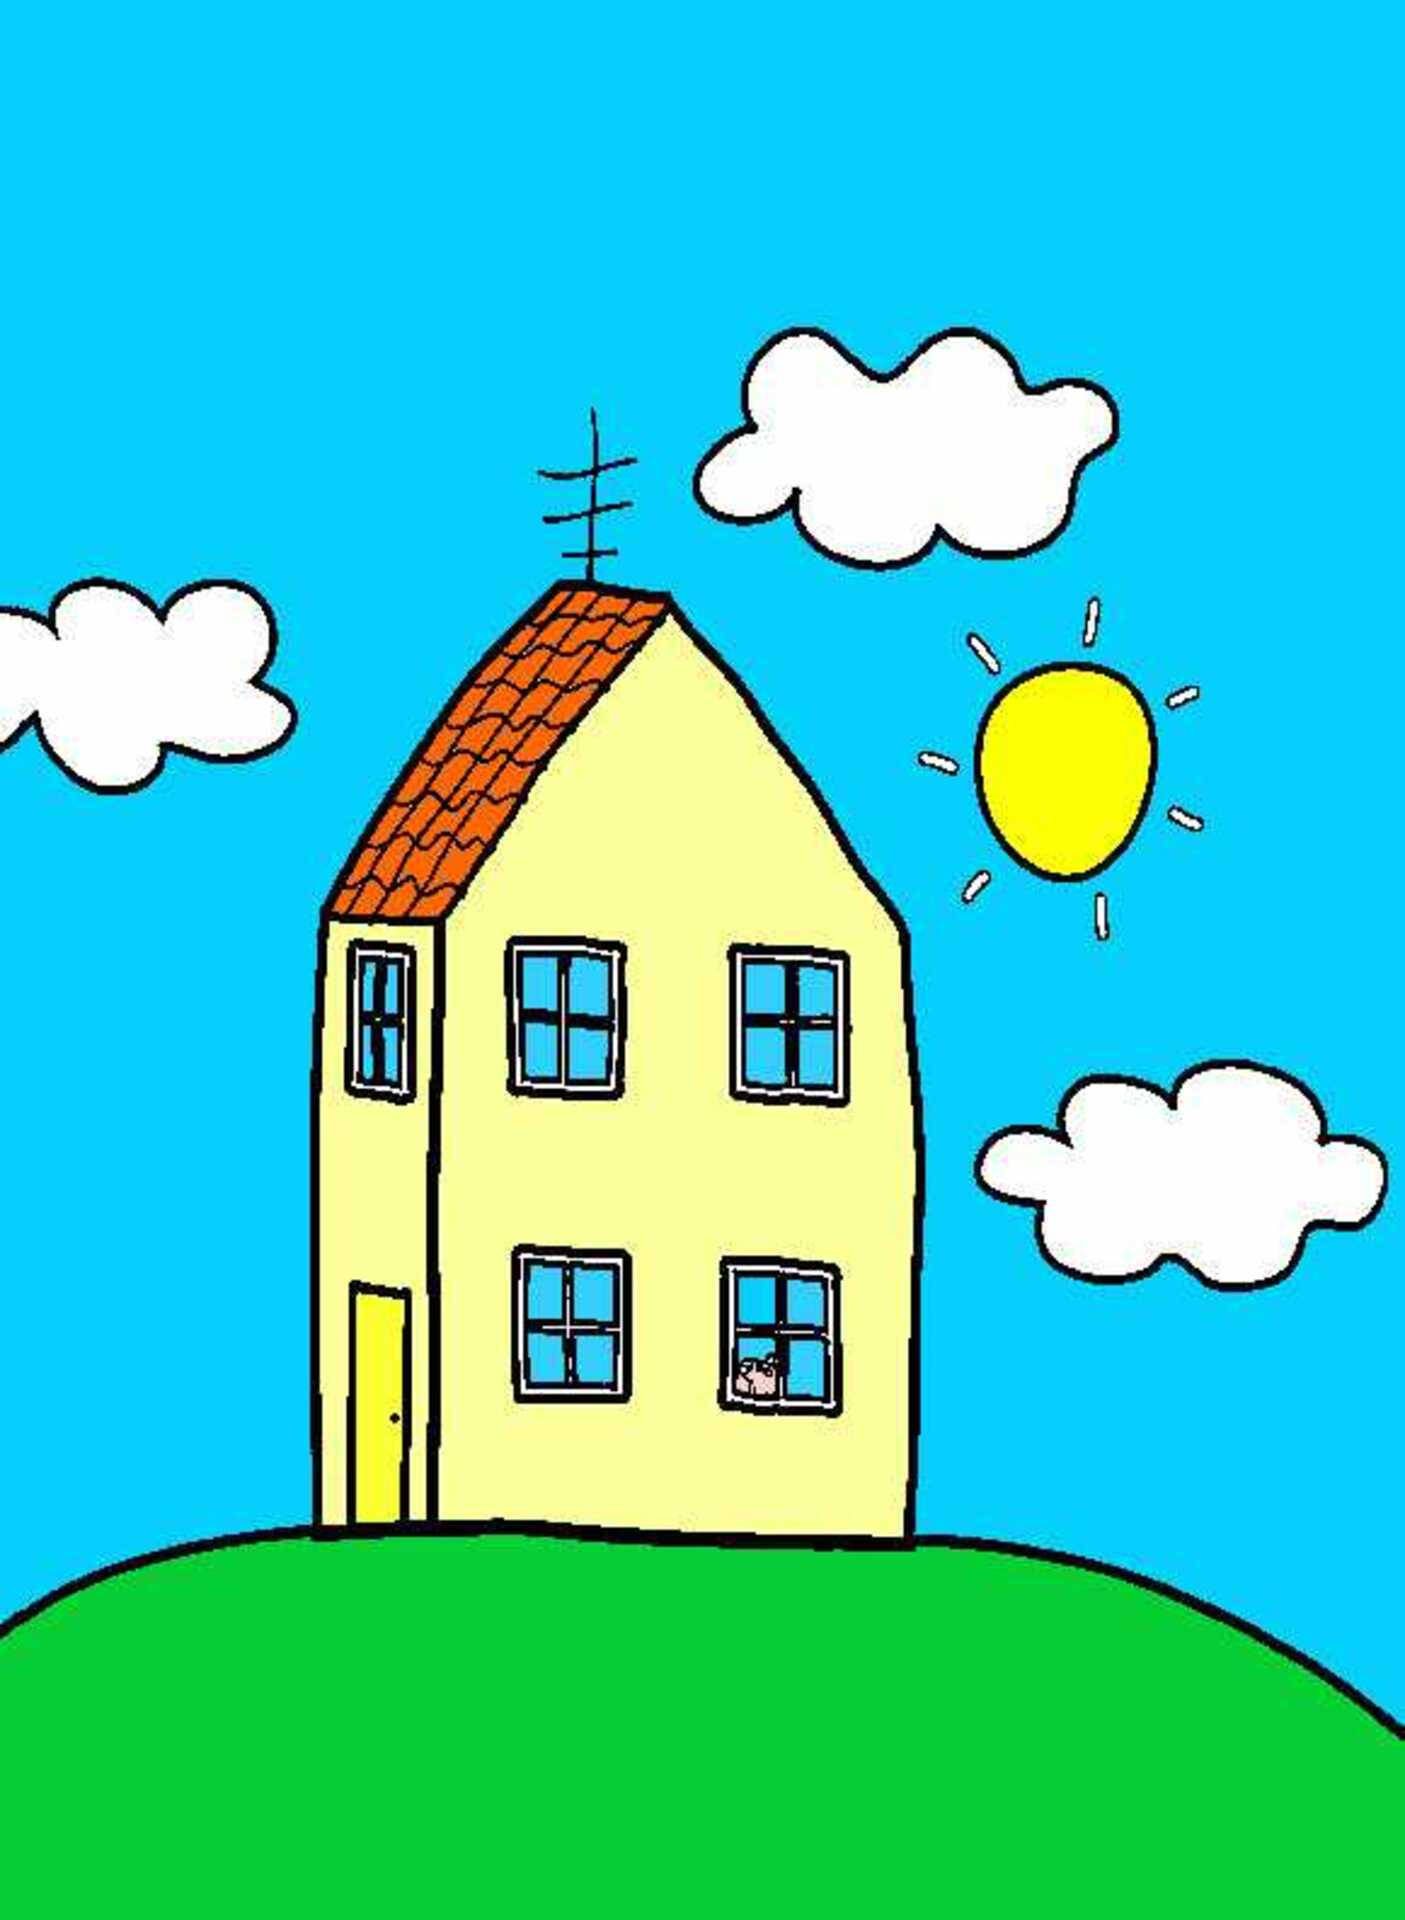 Enjoy the Colorful Adventures of Peppa Pig from her Very Own House Wallpaper